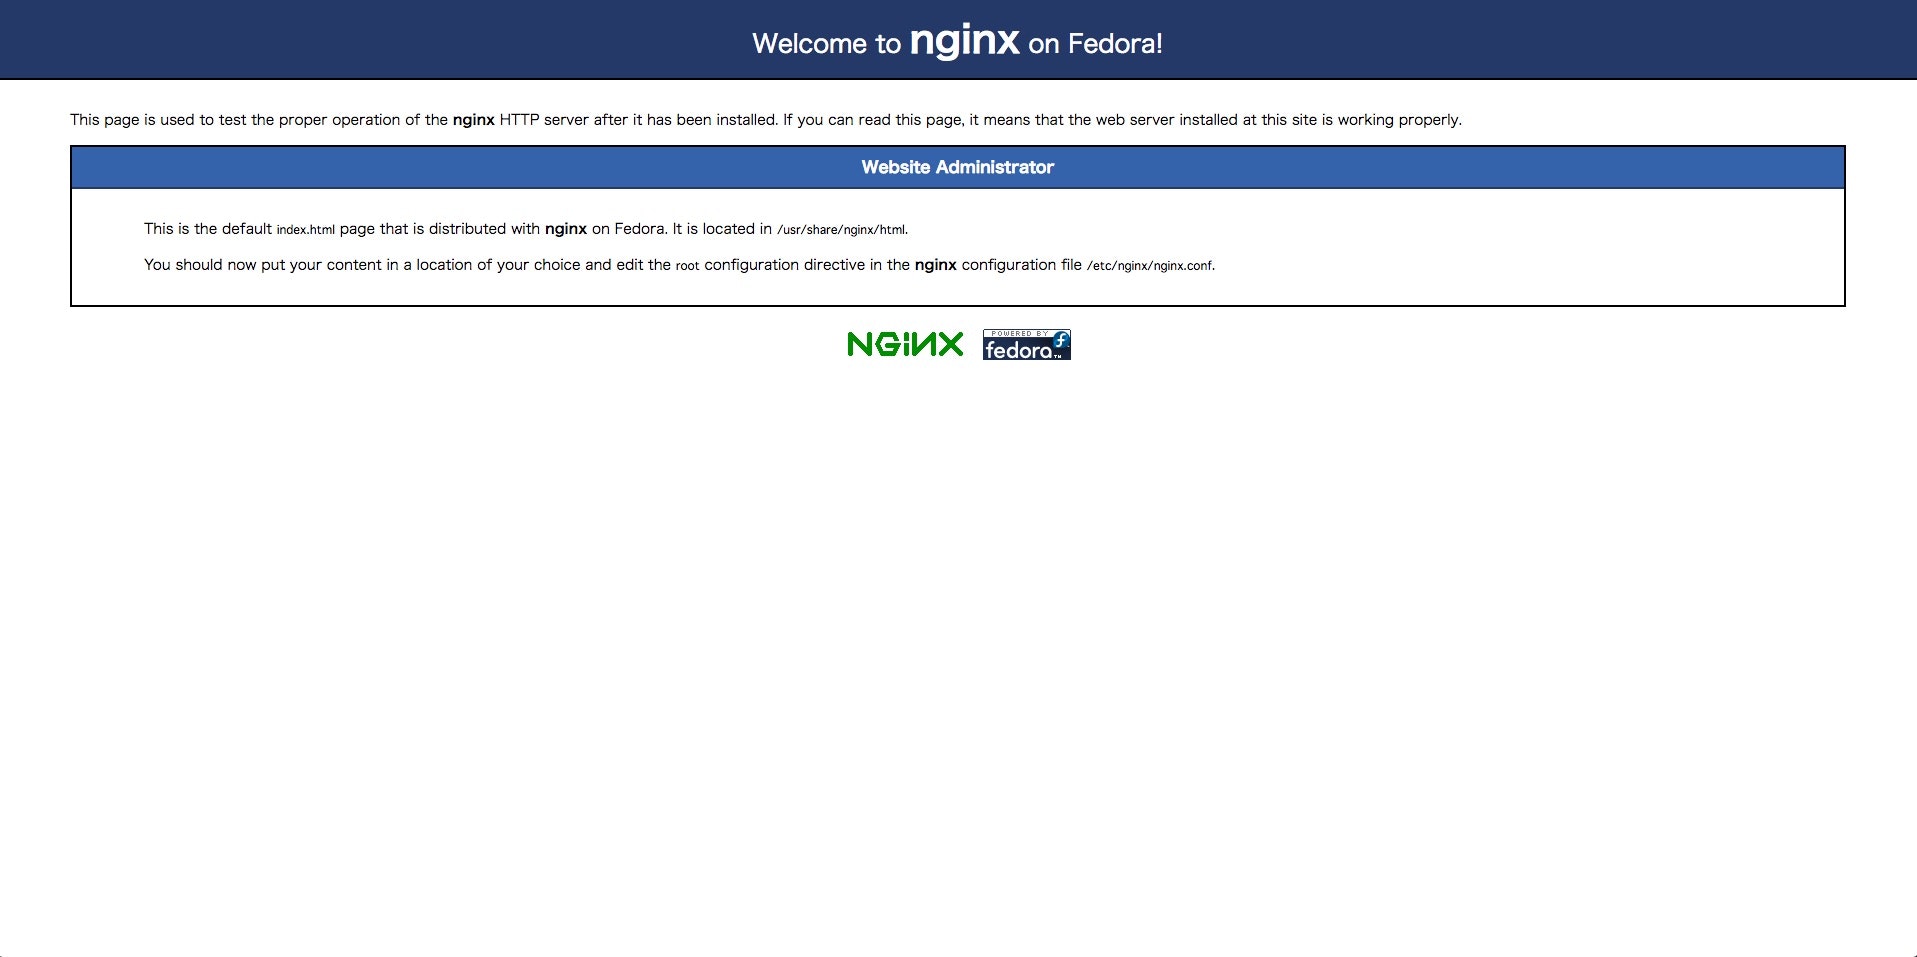 Test_Page_for_the_Nginx_HTTP_Server_on_Fedora.jpg